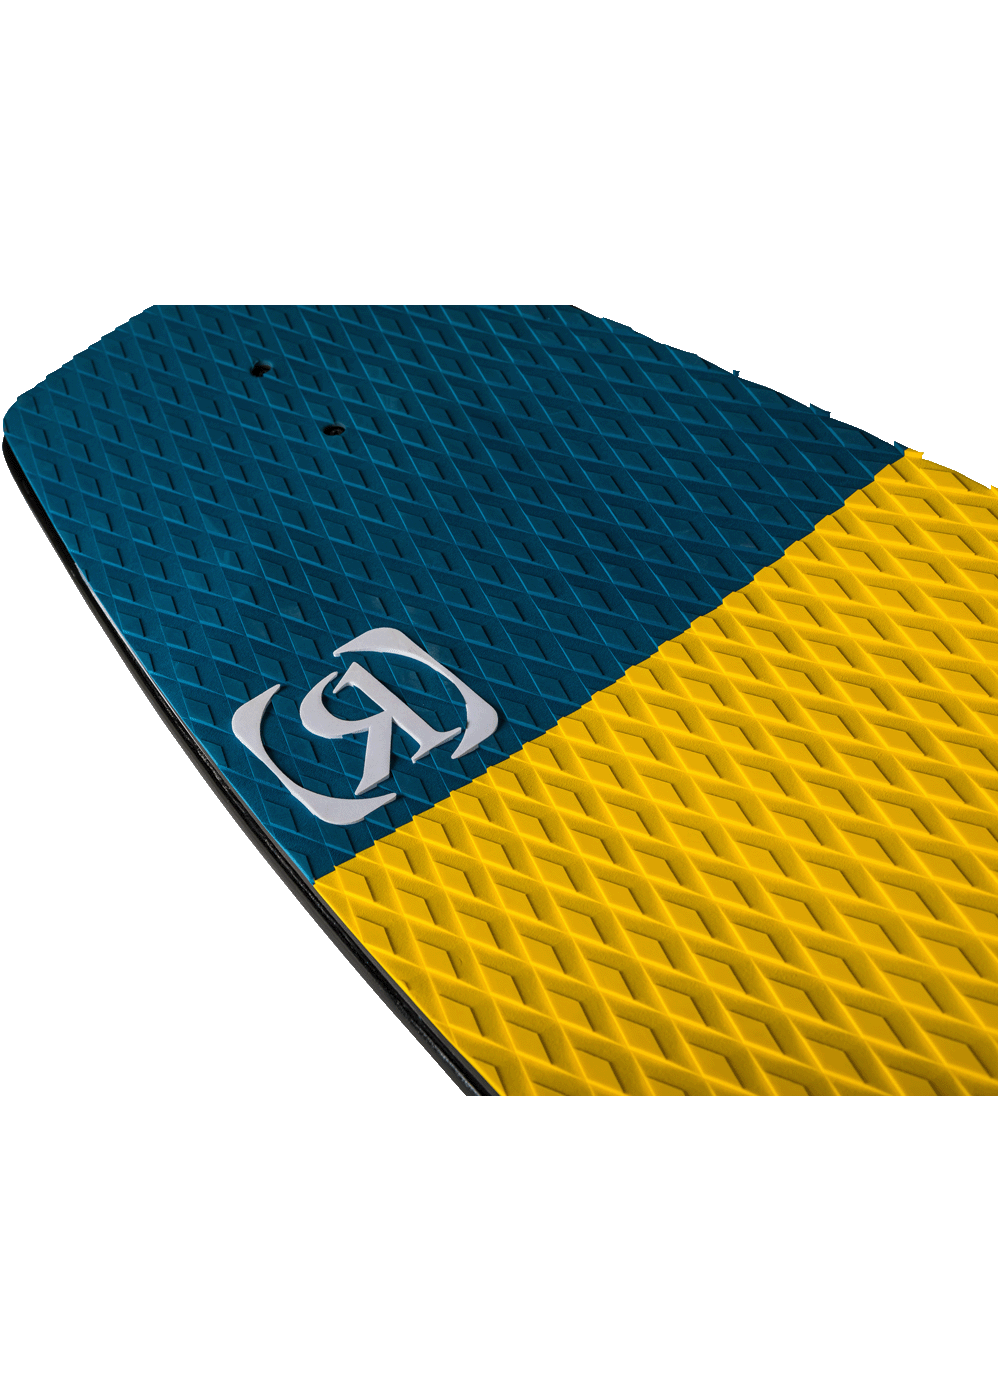 2022 Ronix Wakeskates Electric Collective Inset 2 copy